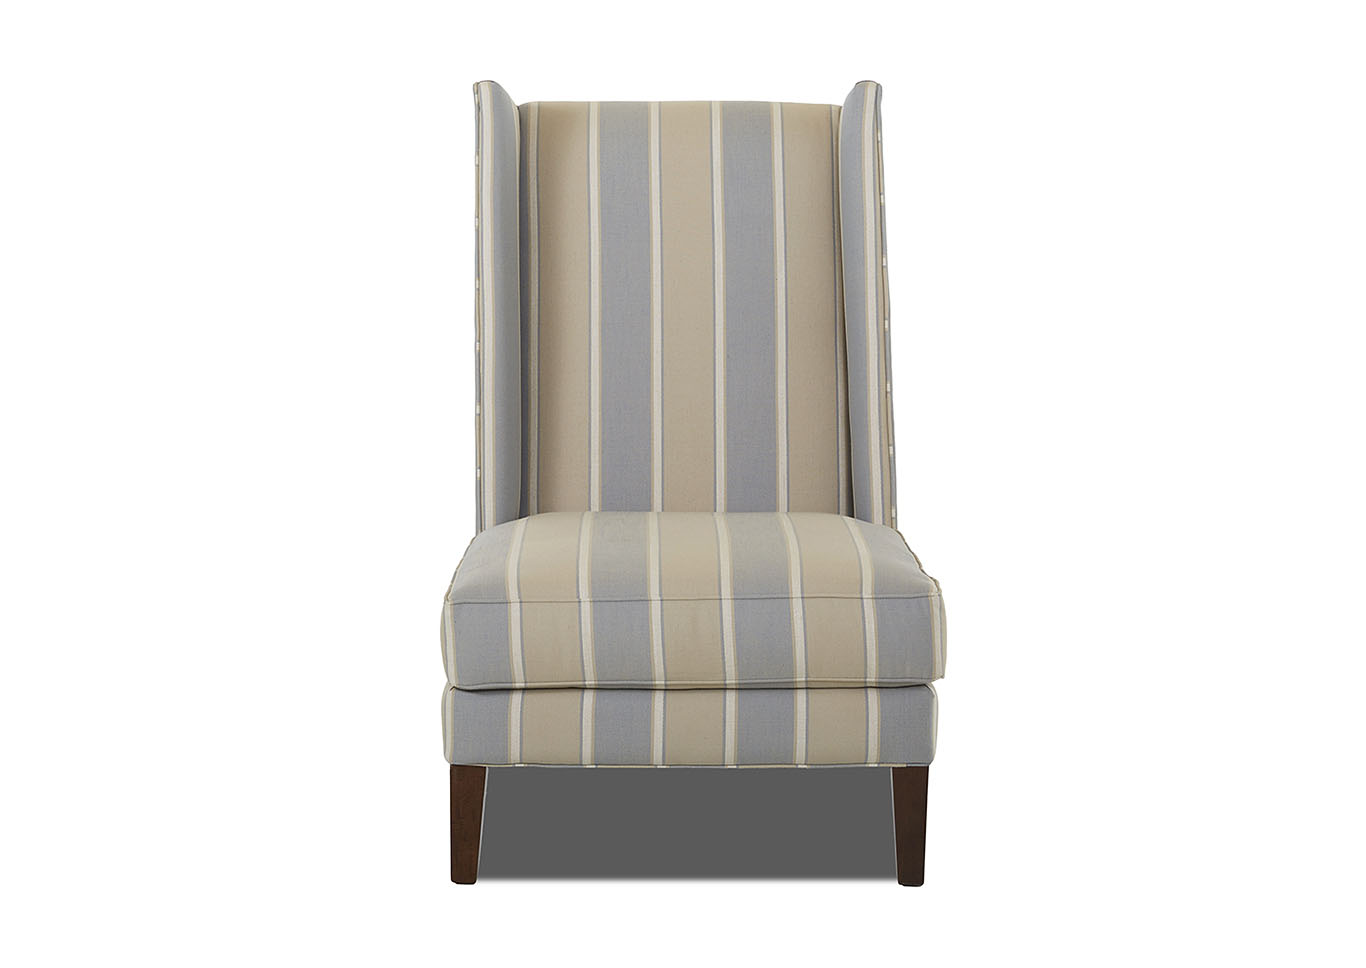 Asher Stationary Fabric Chair,Klaussner Home Furnishings